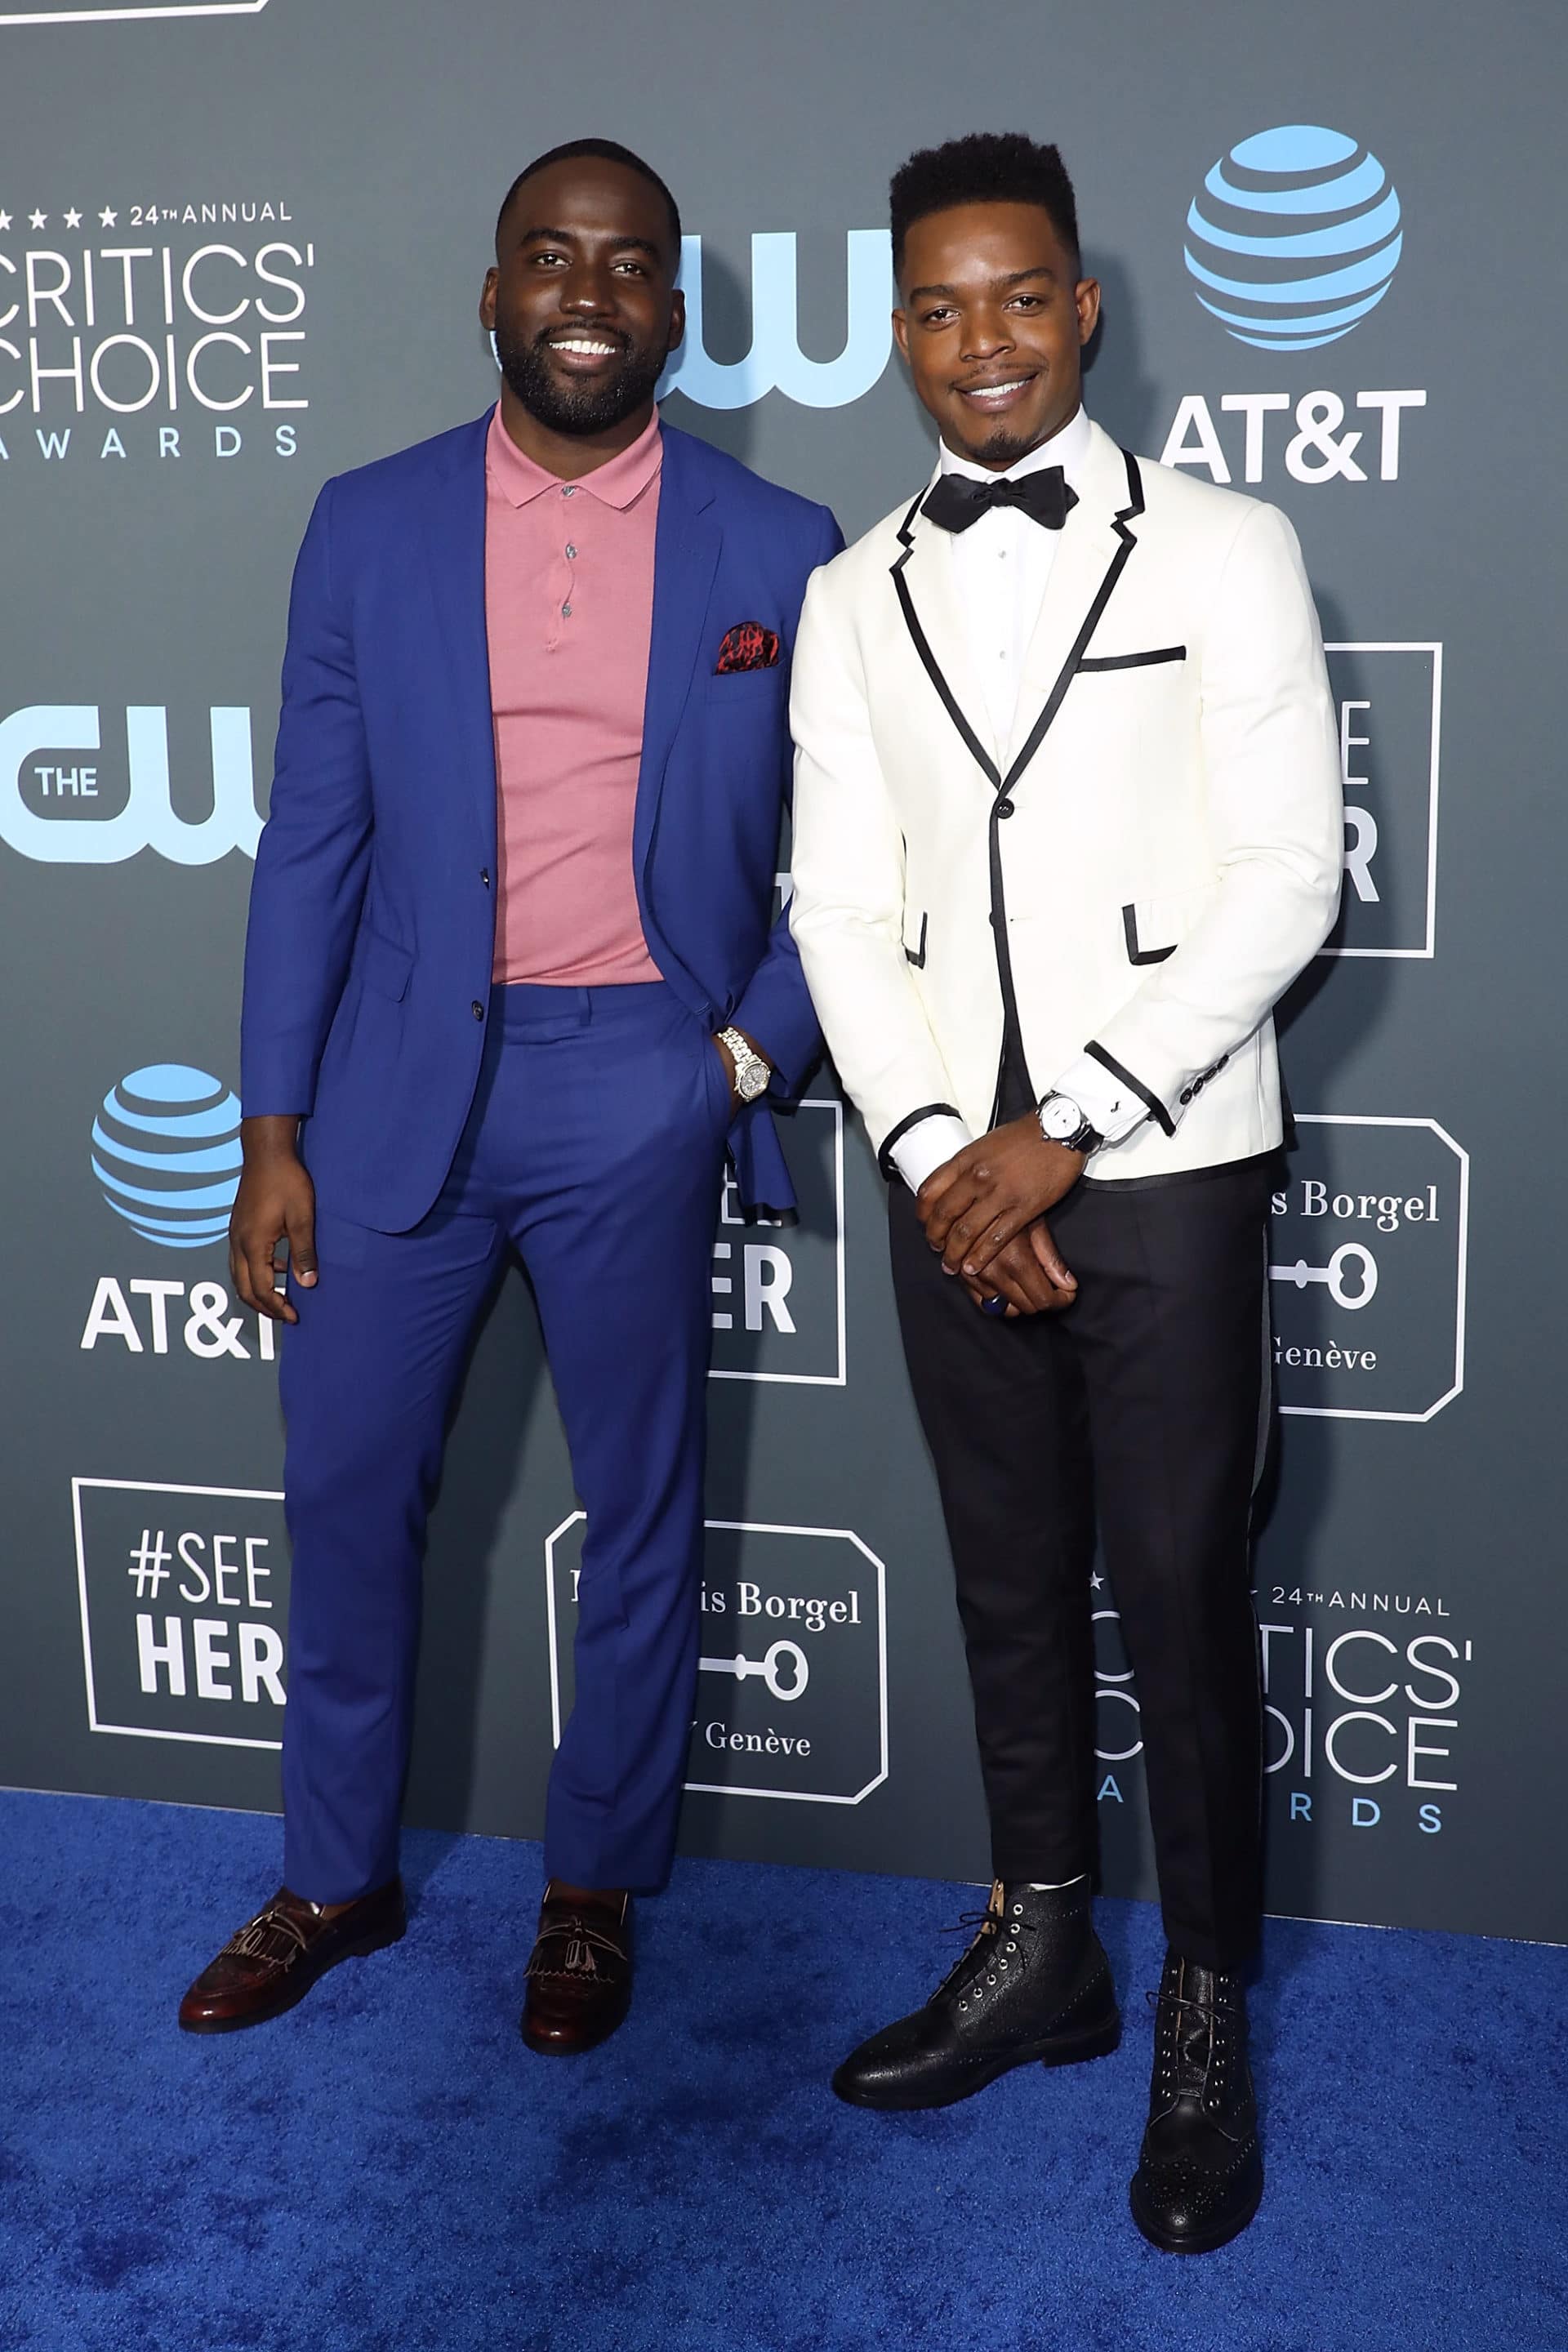 Old Hollywood Glamour And Elegant Menswear Ruled The 2019 Critics’ Choice Awards Red Carpet